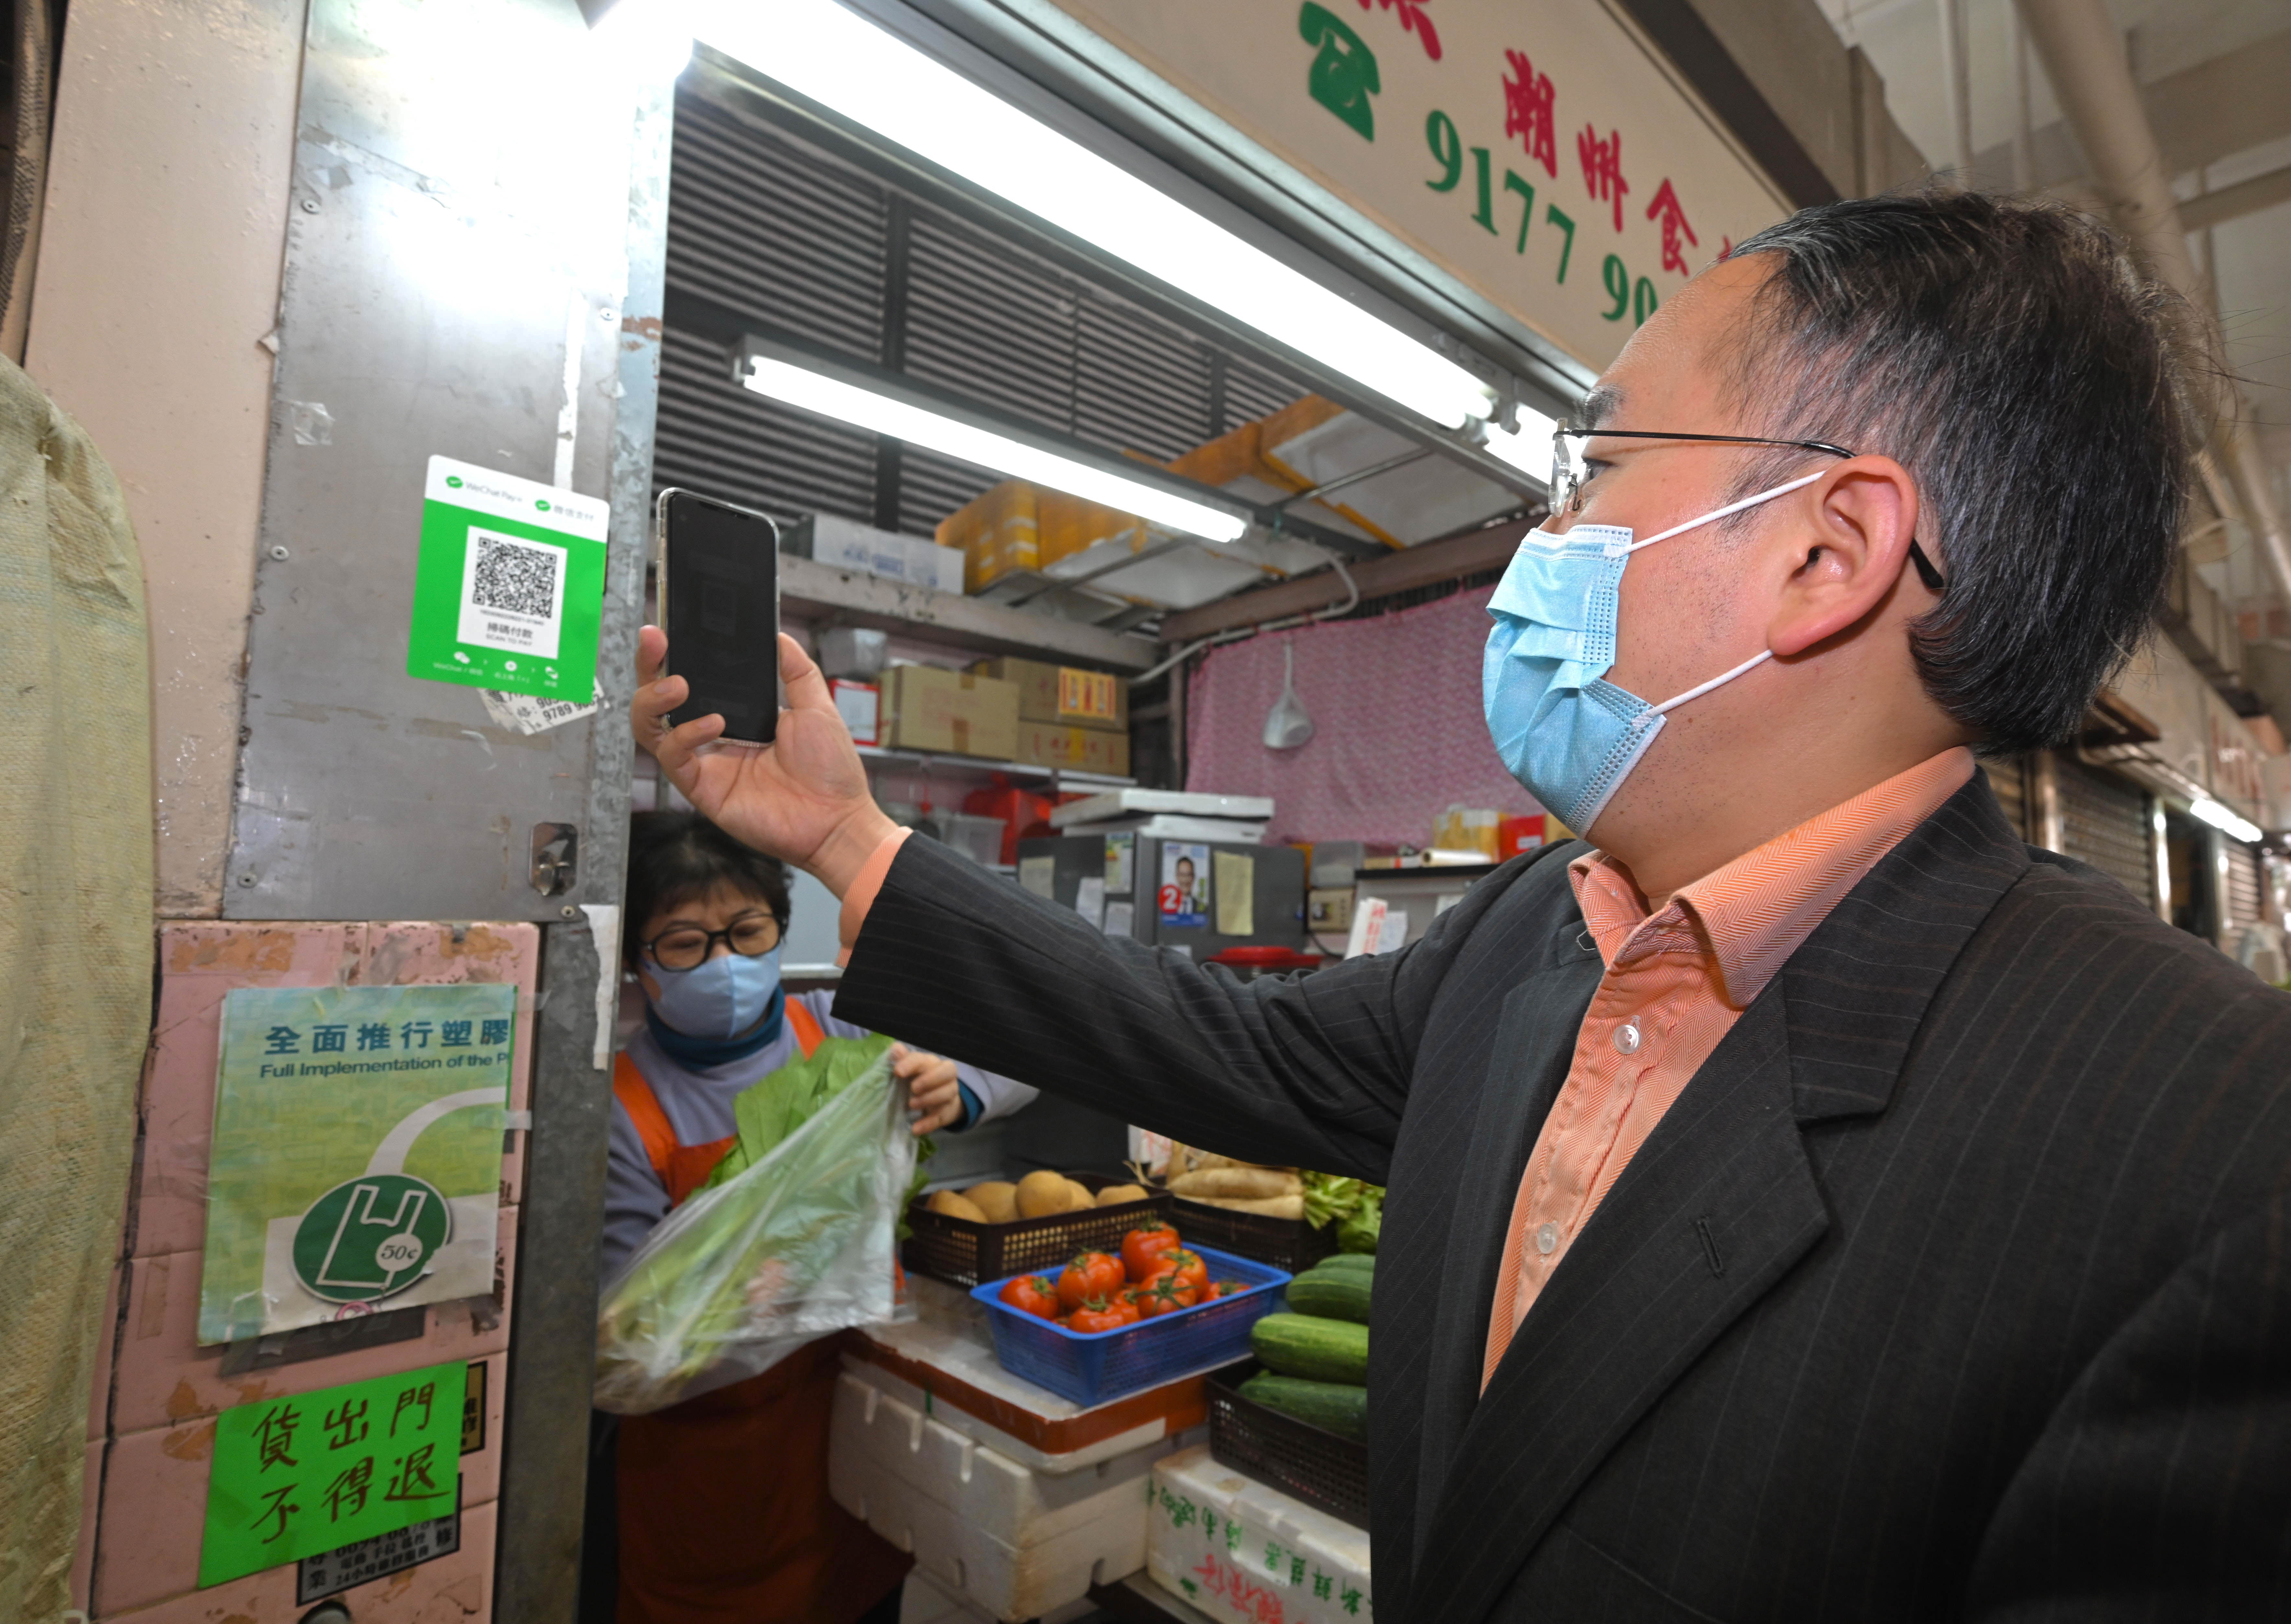 The Secretary for Financial Services and the Treasury, Mr Christopher Hui, today (November 25) visits several stalls at Smithfield Market and makes purchases with e-payment.